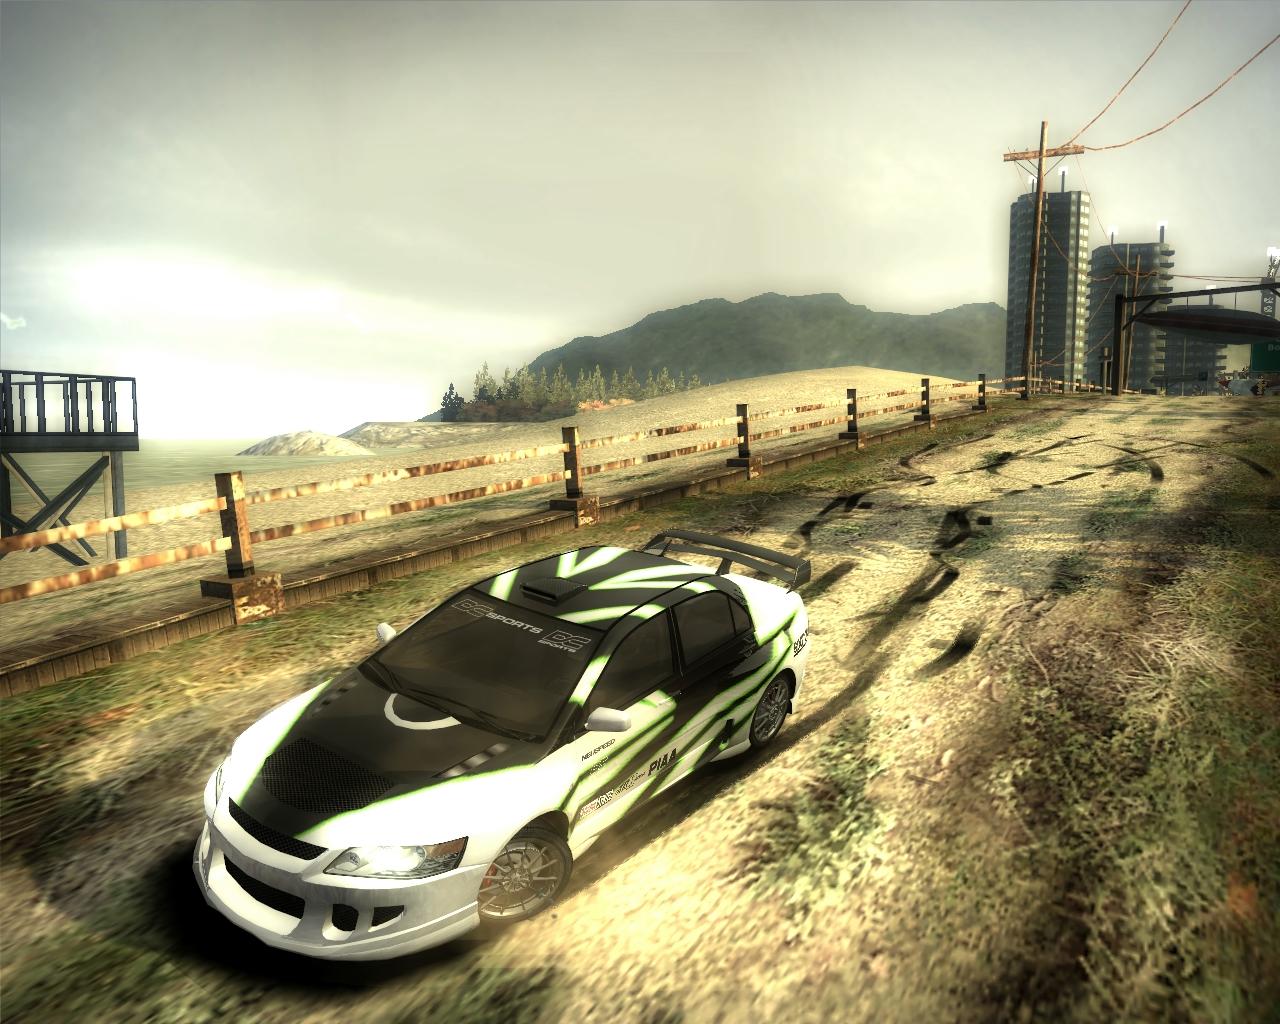 Nfs mw cars. NFS most wanted. NFS MW 2005. Нид фор СПИД мост вантед 2005. Игра NFS most wanted 2005.